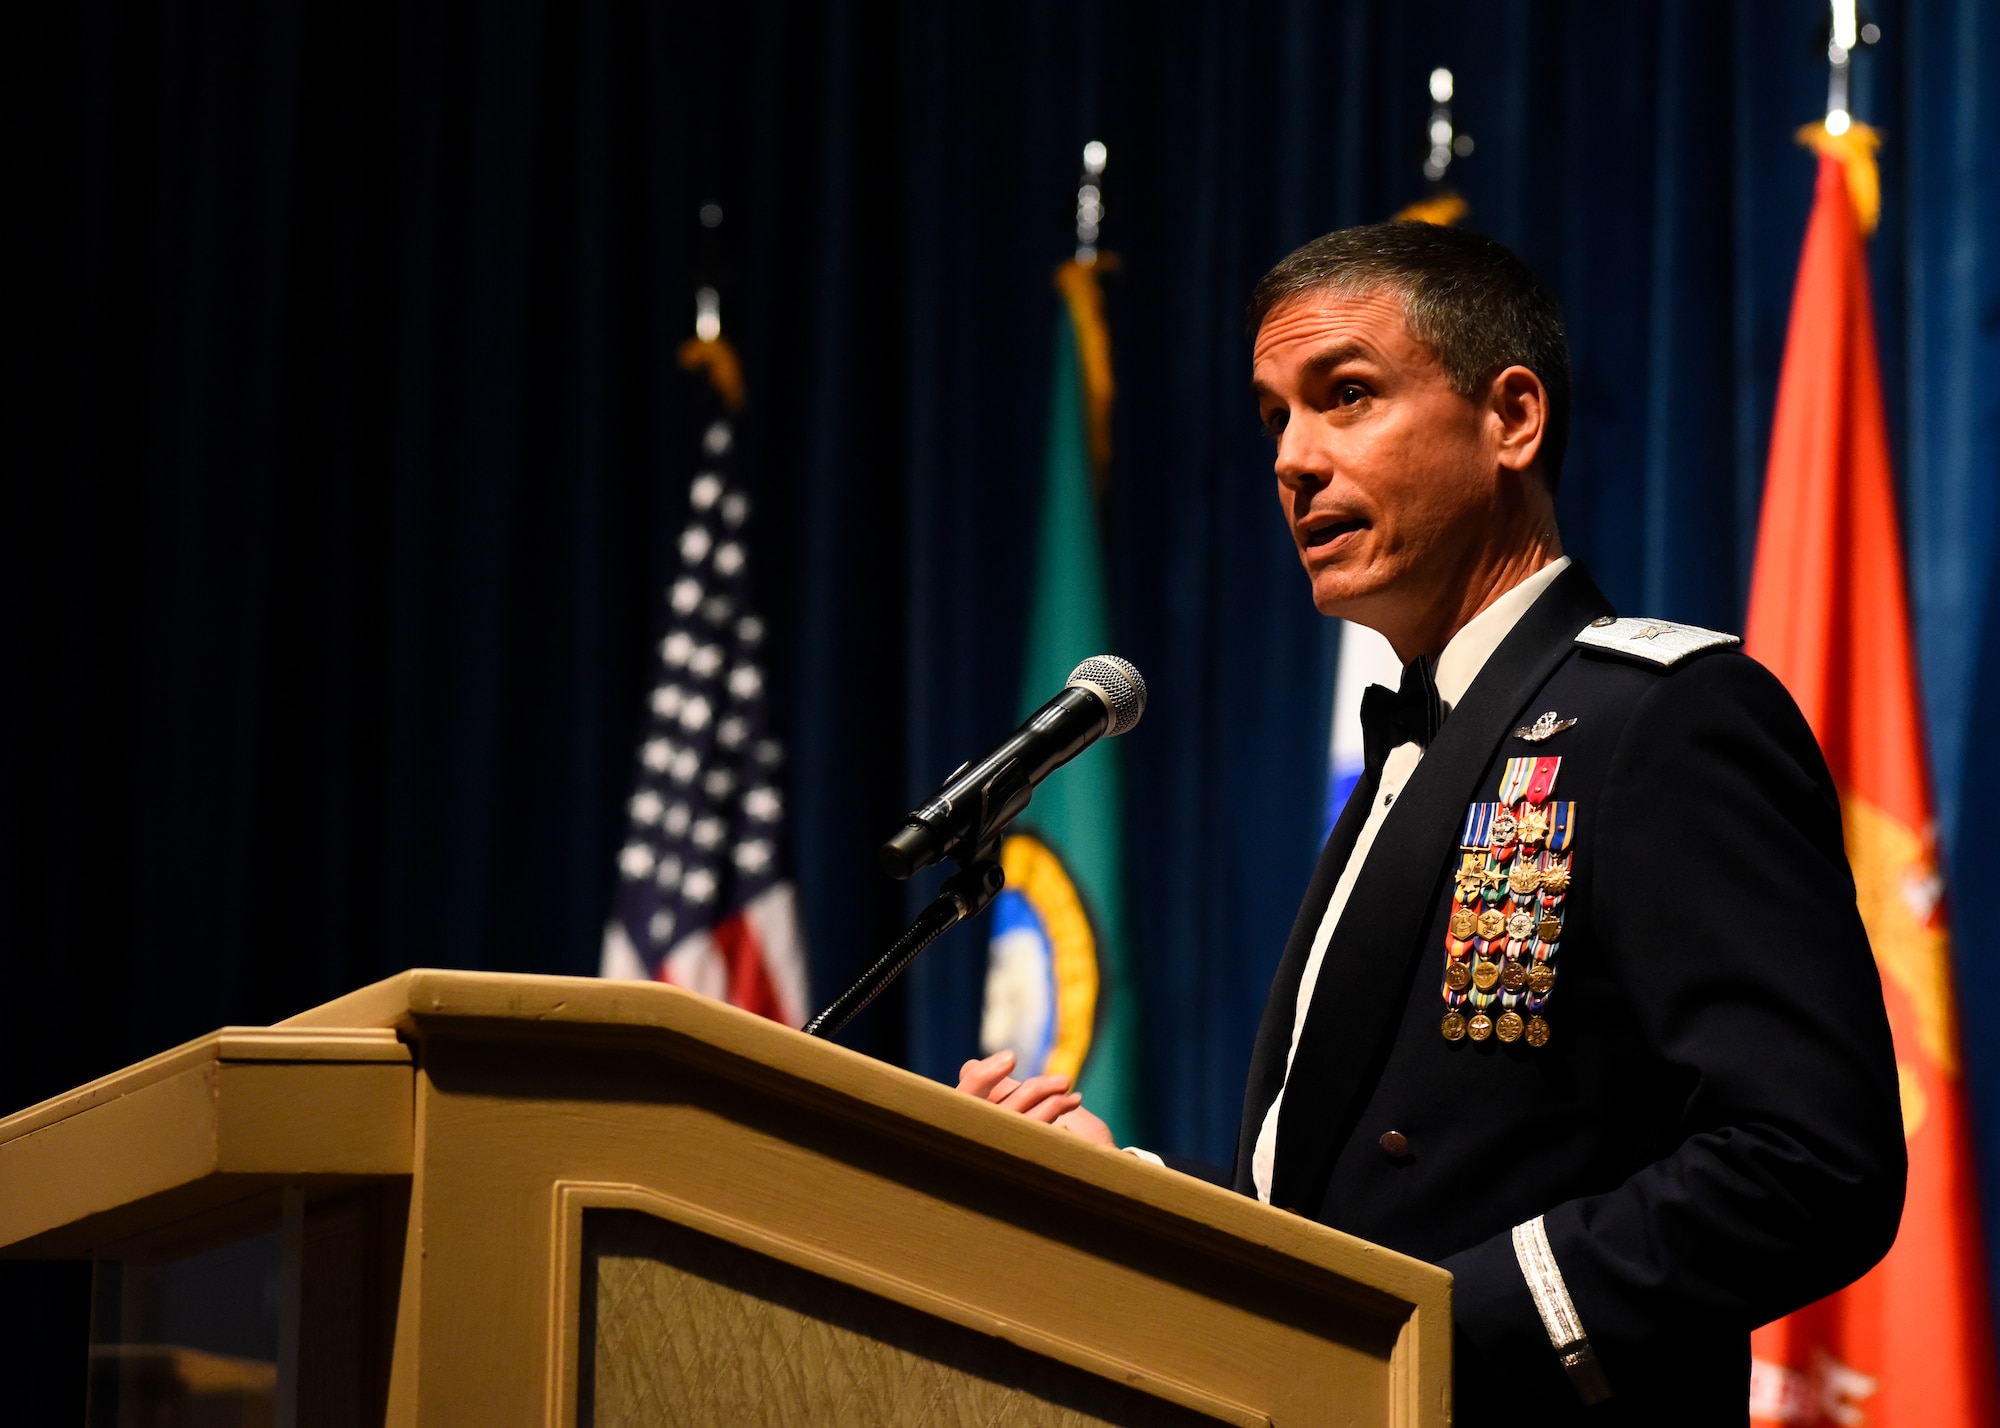 Brig. Gen. Paul Tibbets, Global Strike Command deputy commander, speaks in front of attendees at Fairchild's Air Force Ball at Northern Quest Resort and Casino in Airway Heights, Washington, Sept. 15, 2018. Tibbets served in a variety of operational assignments as a B-1B Lancer pilot as well as a B-2 Spirit pilot, recording more than 4,000 total flying hours. (U.S. Air Force photo/Airman 1st Class Lawrence Sena)